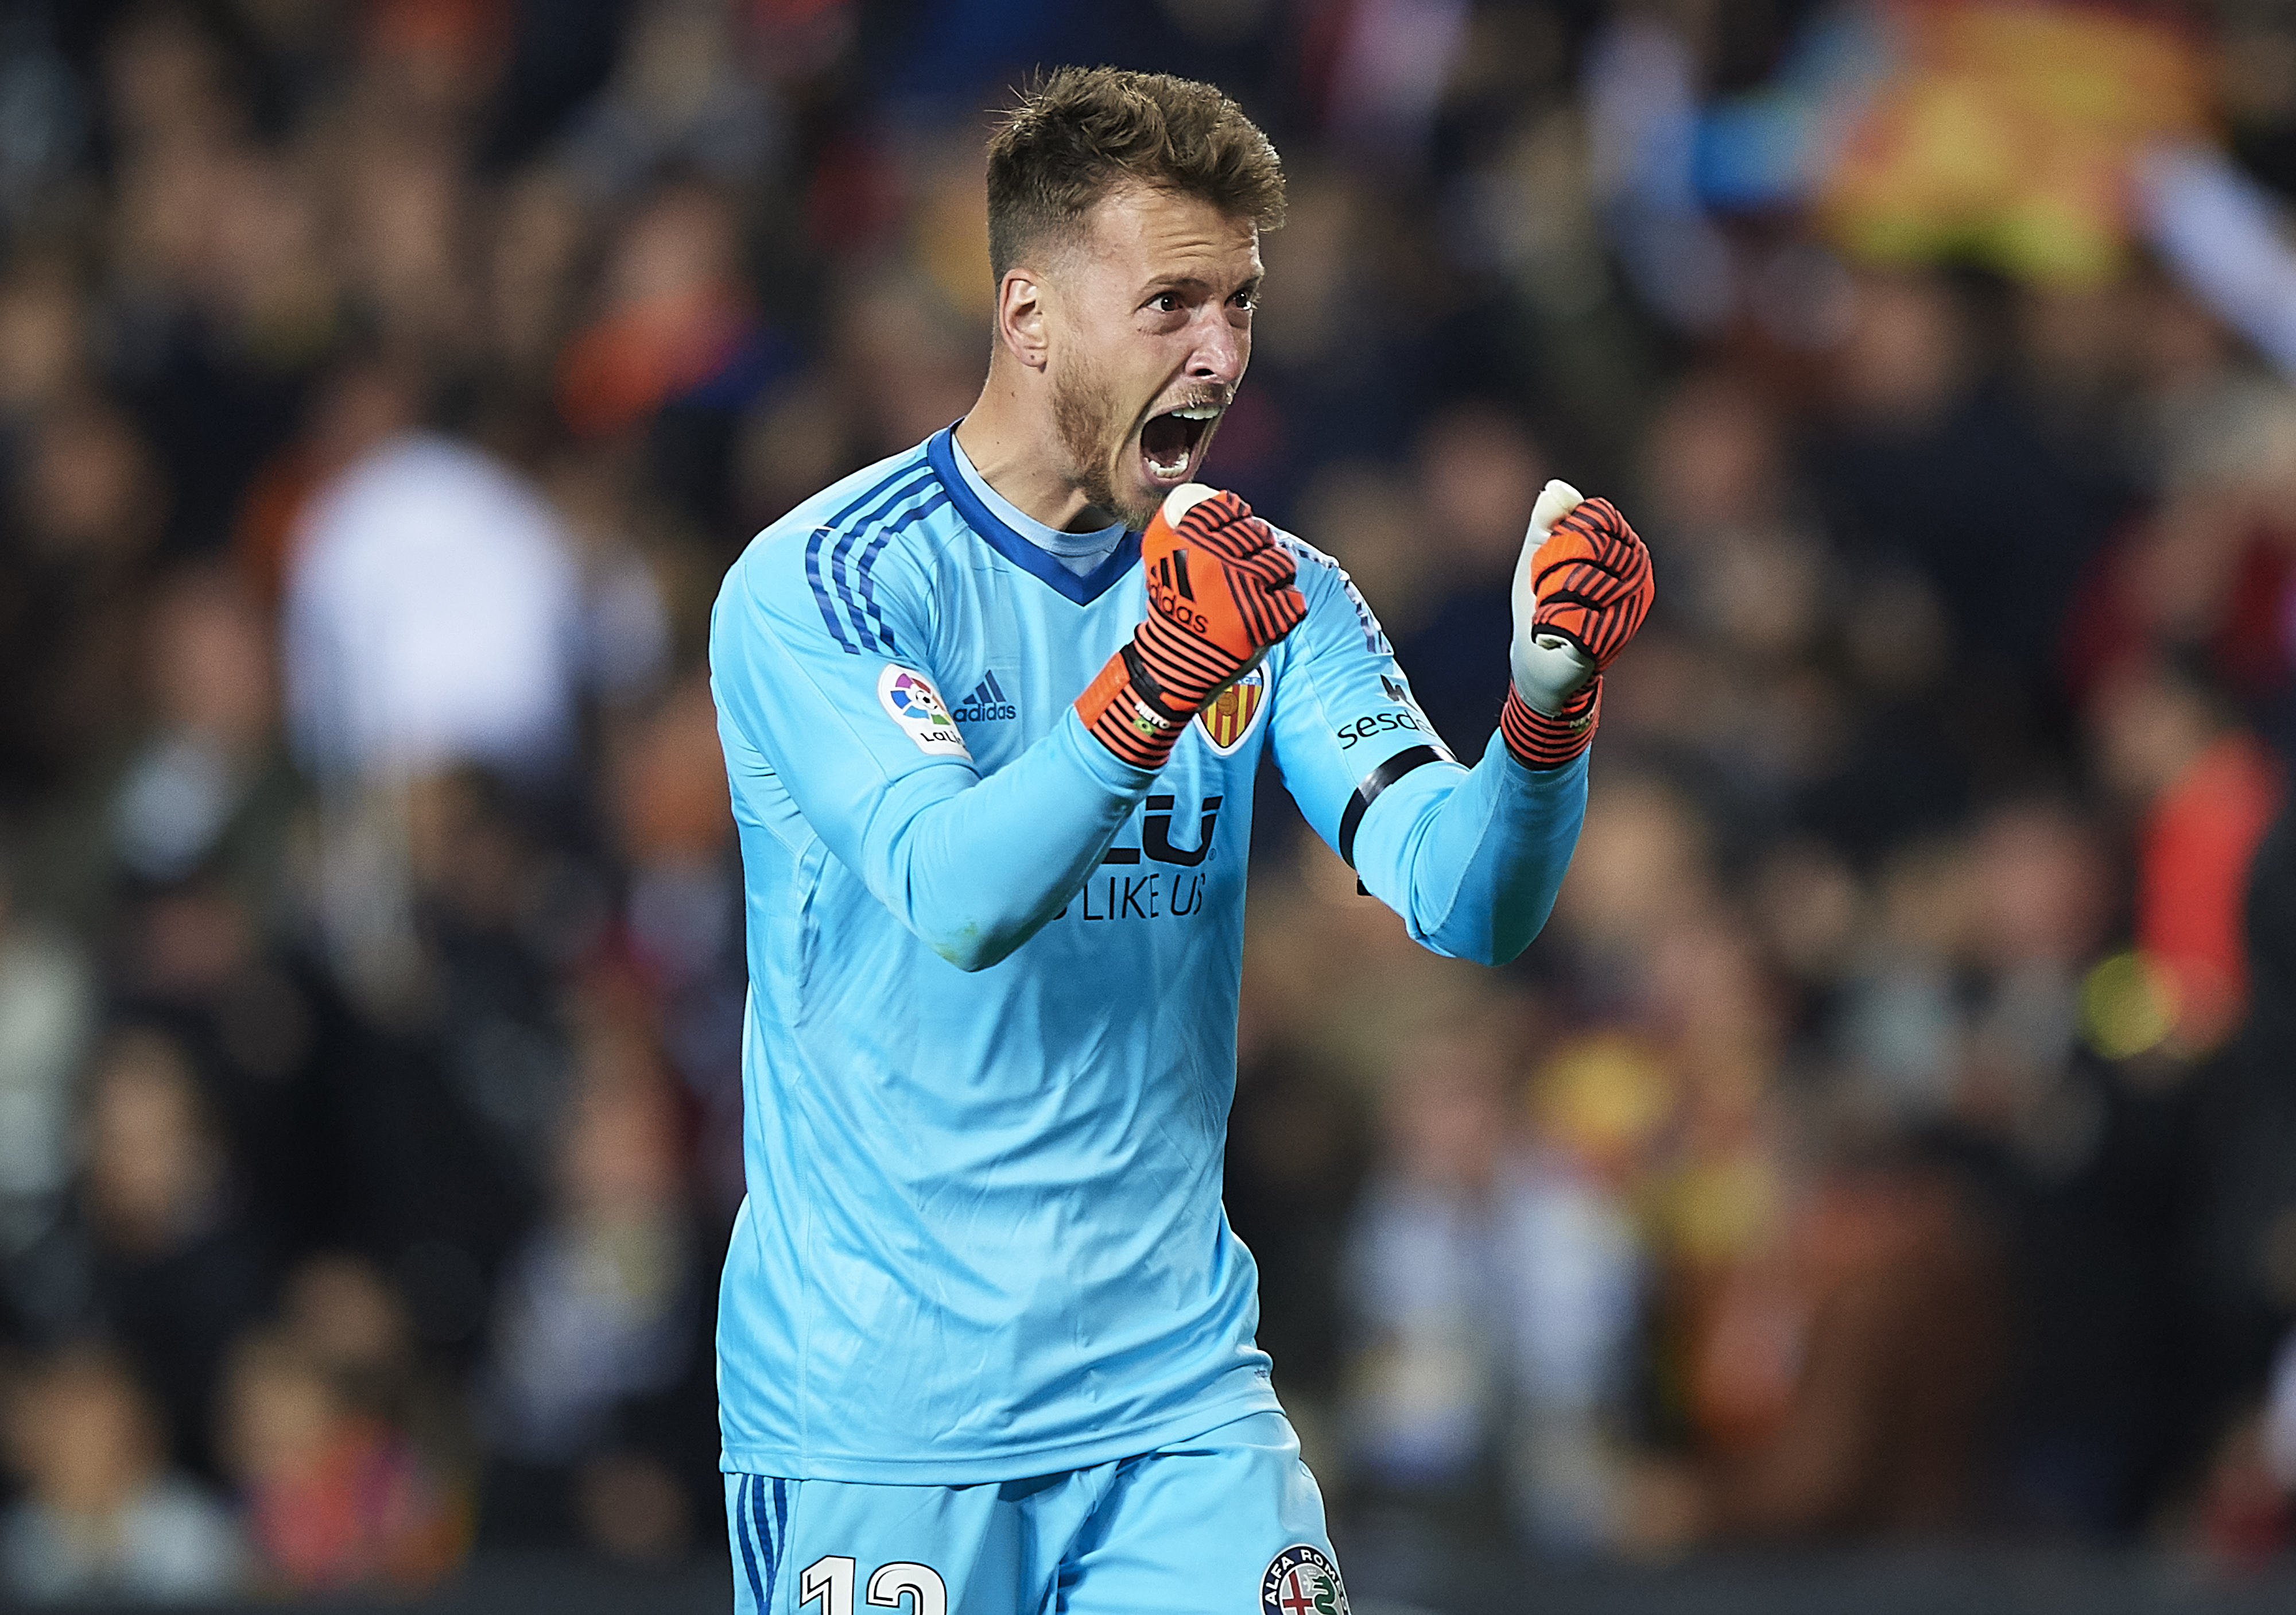 Neto is enjoying his life and football at Valencia. (Picture Courtesy - AFP/Getty Images)